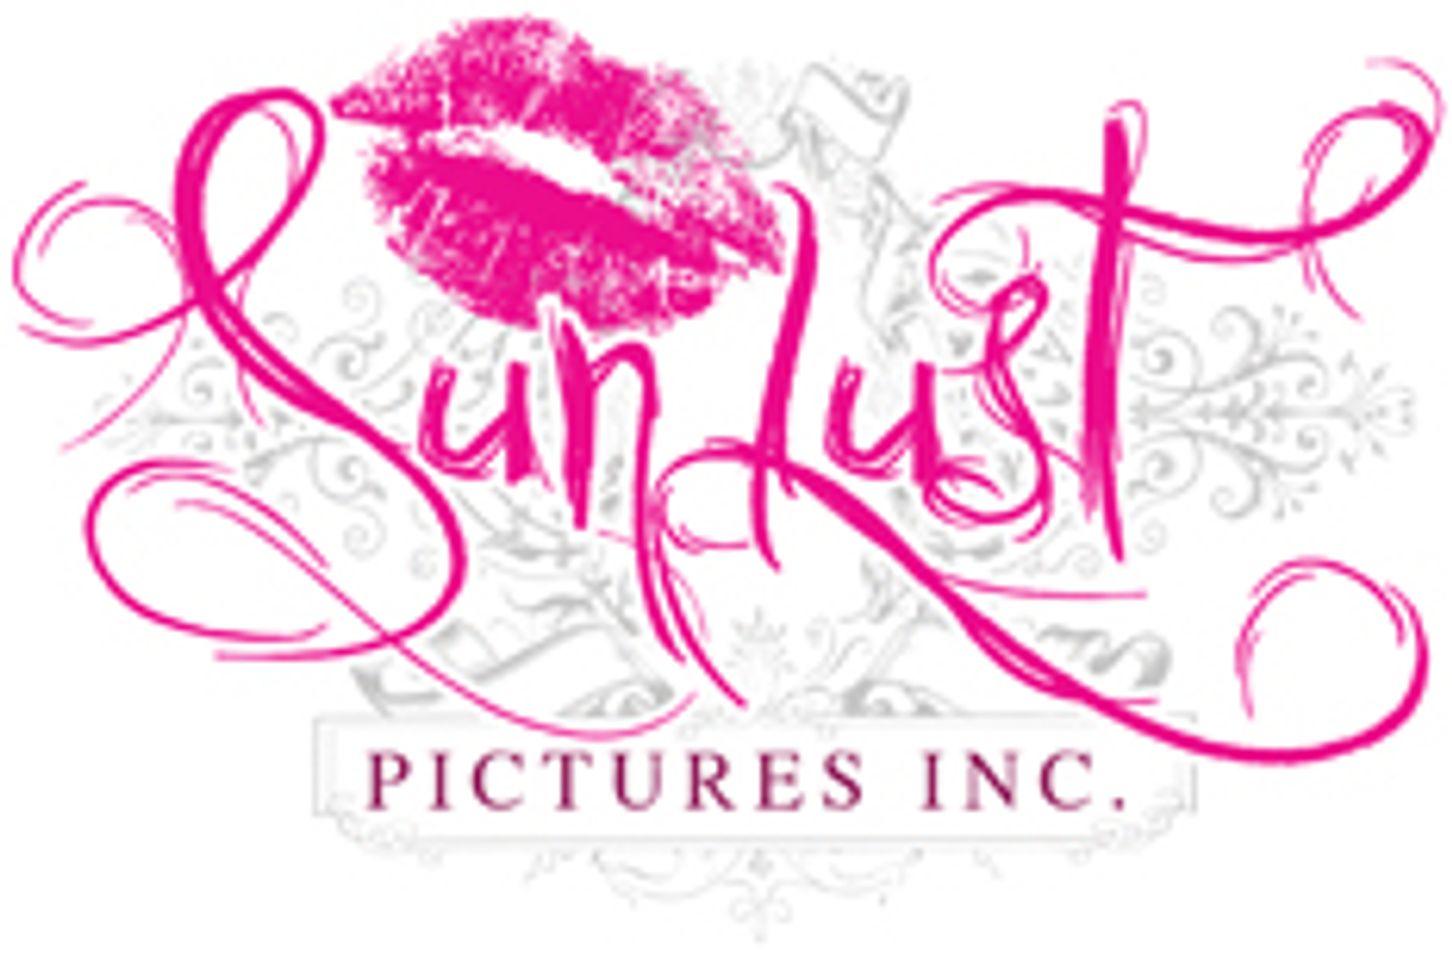 Sunlust Pictures Streets ‘Role Play’